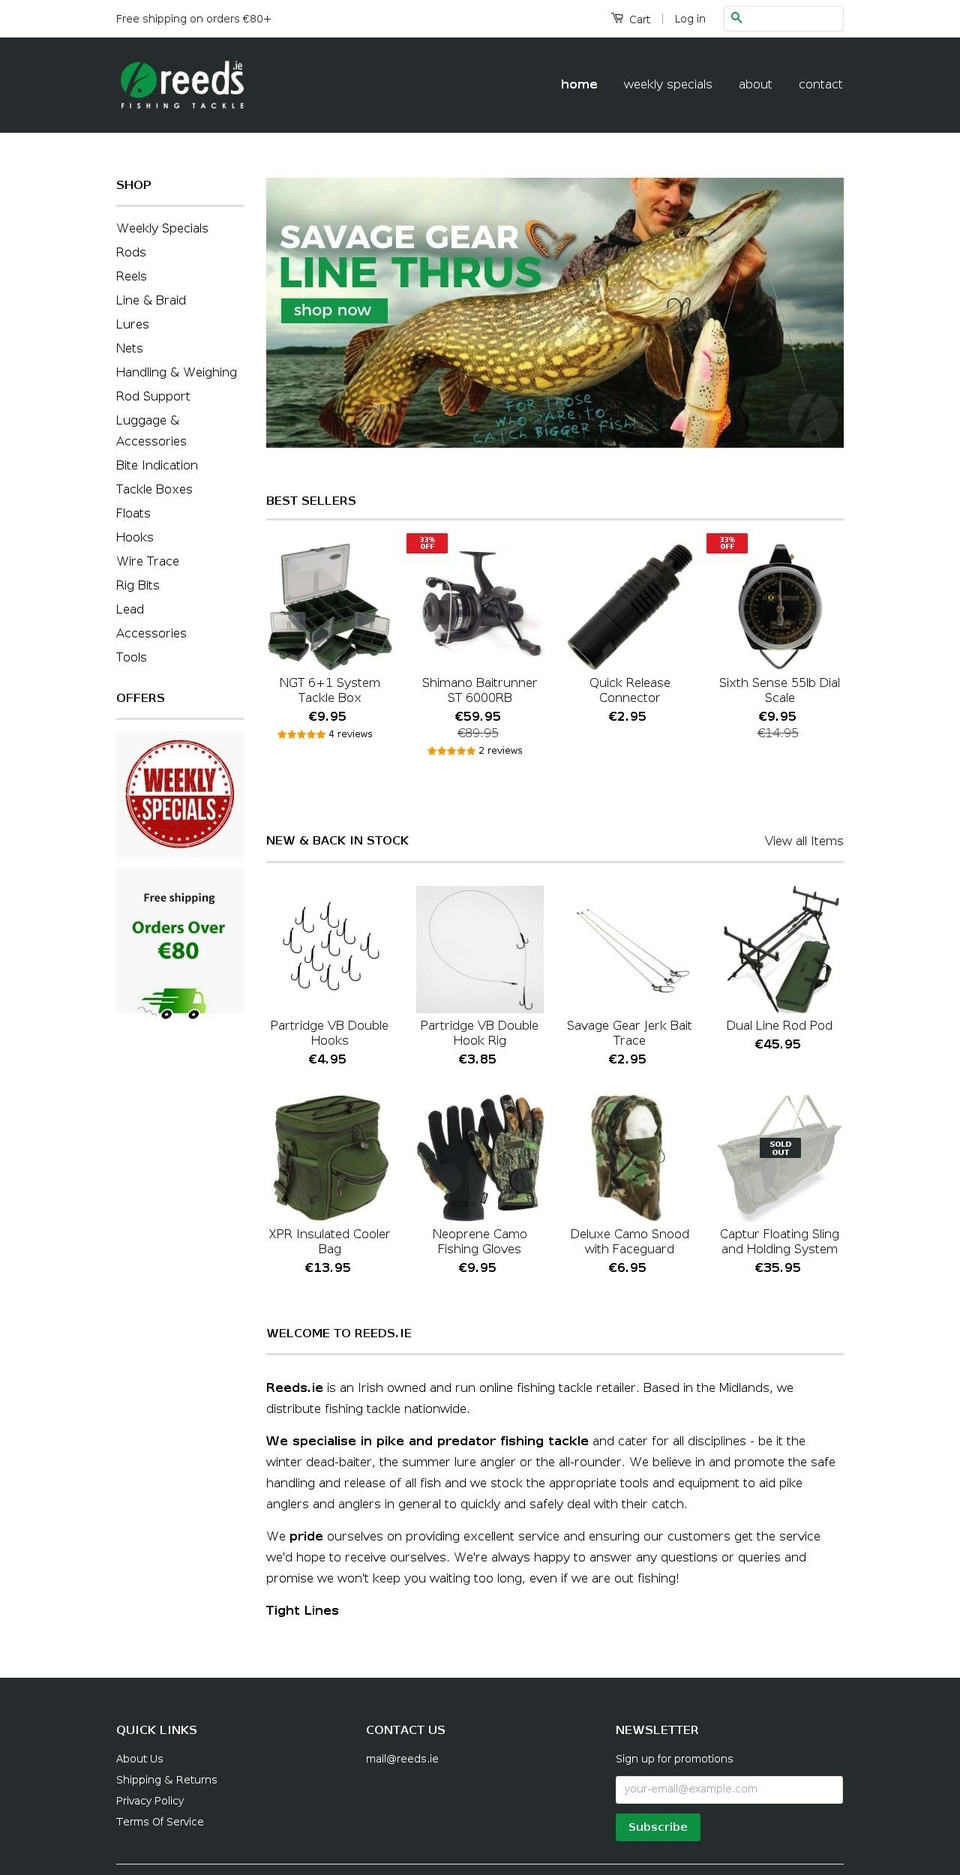 Kalles Shopify theme site example reeds.ie